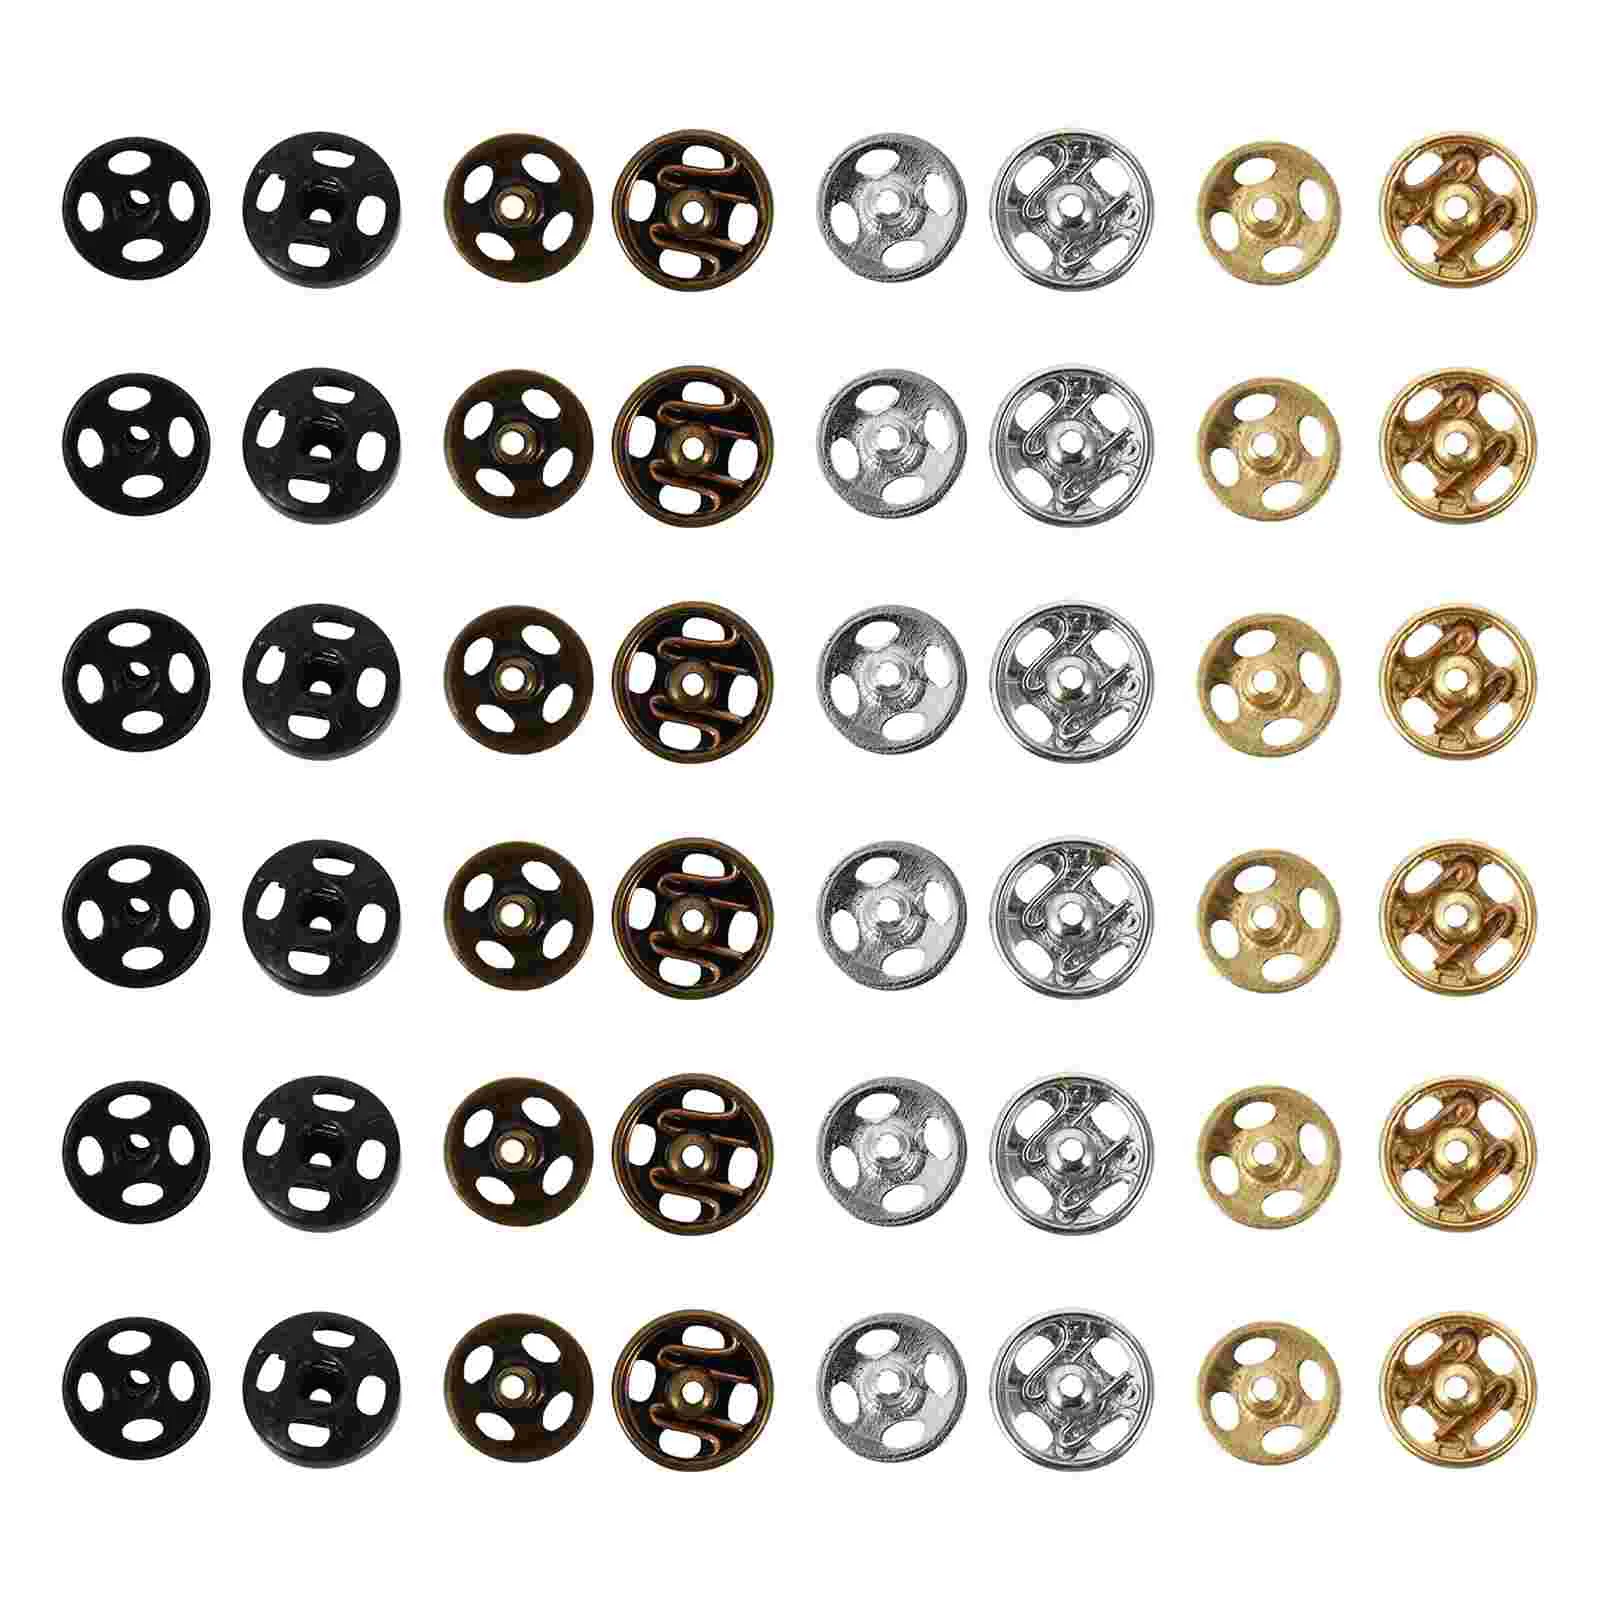 

Buttons Snap Button Clothing Press Fastener Sewing Clothes Metal Diy Snaps Stud Studs Sew Fasteners Rivet Deoration Parts Buckle